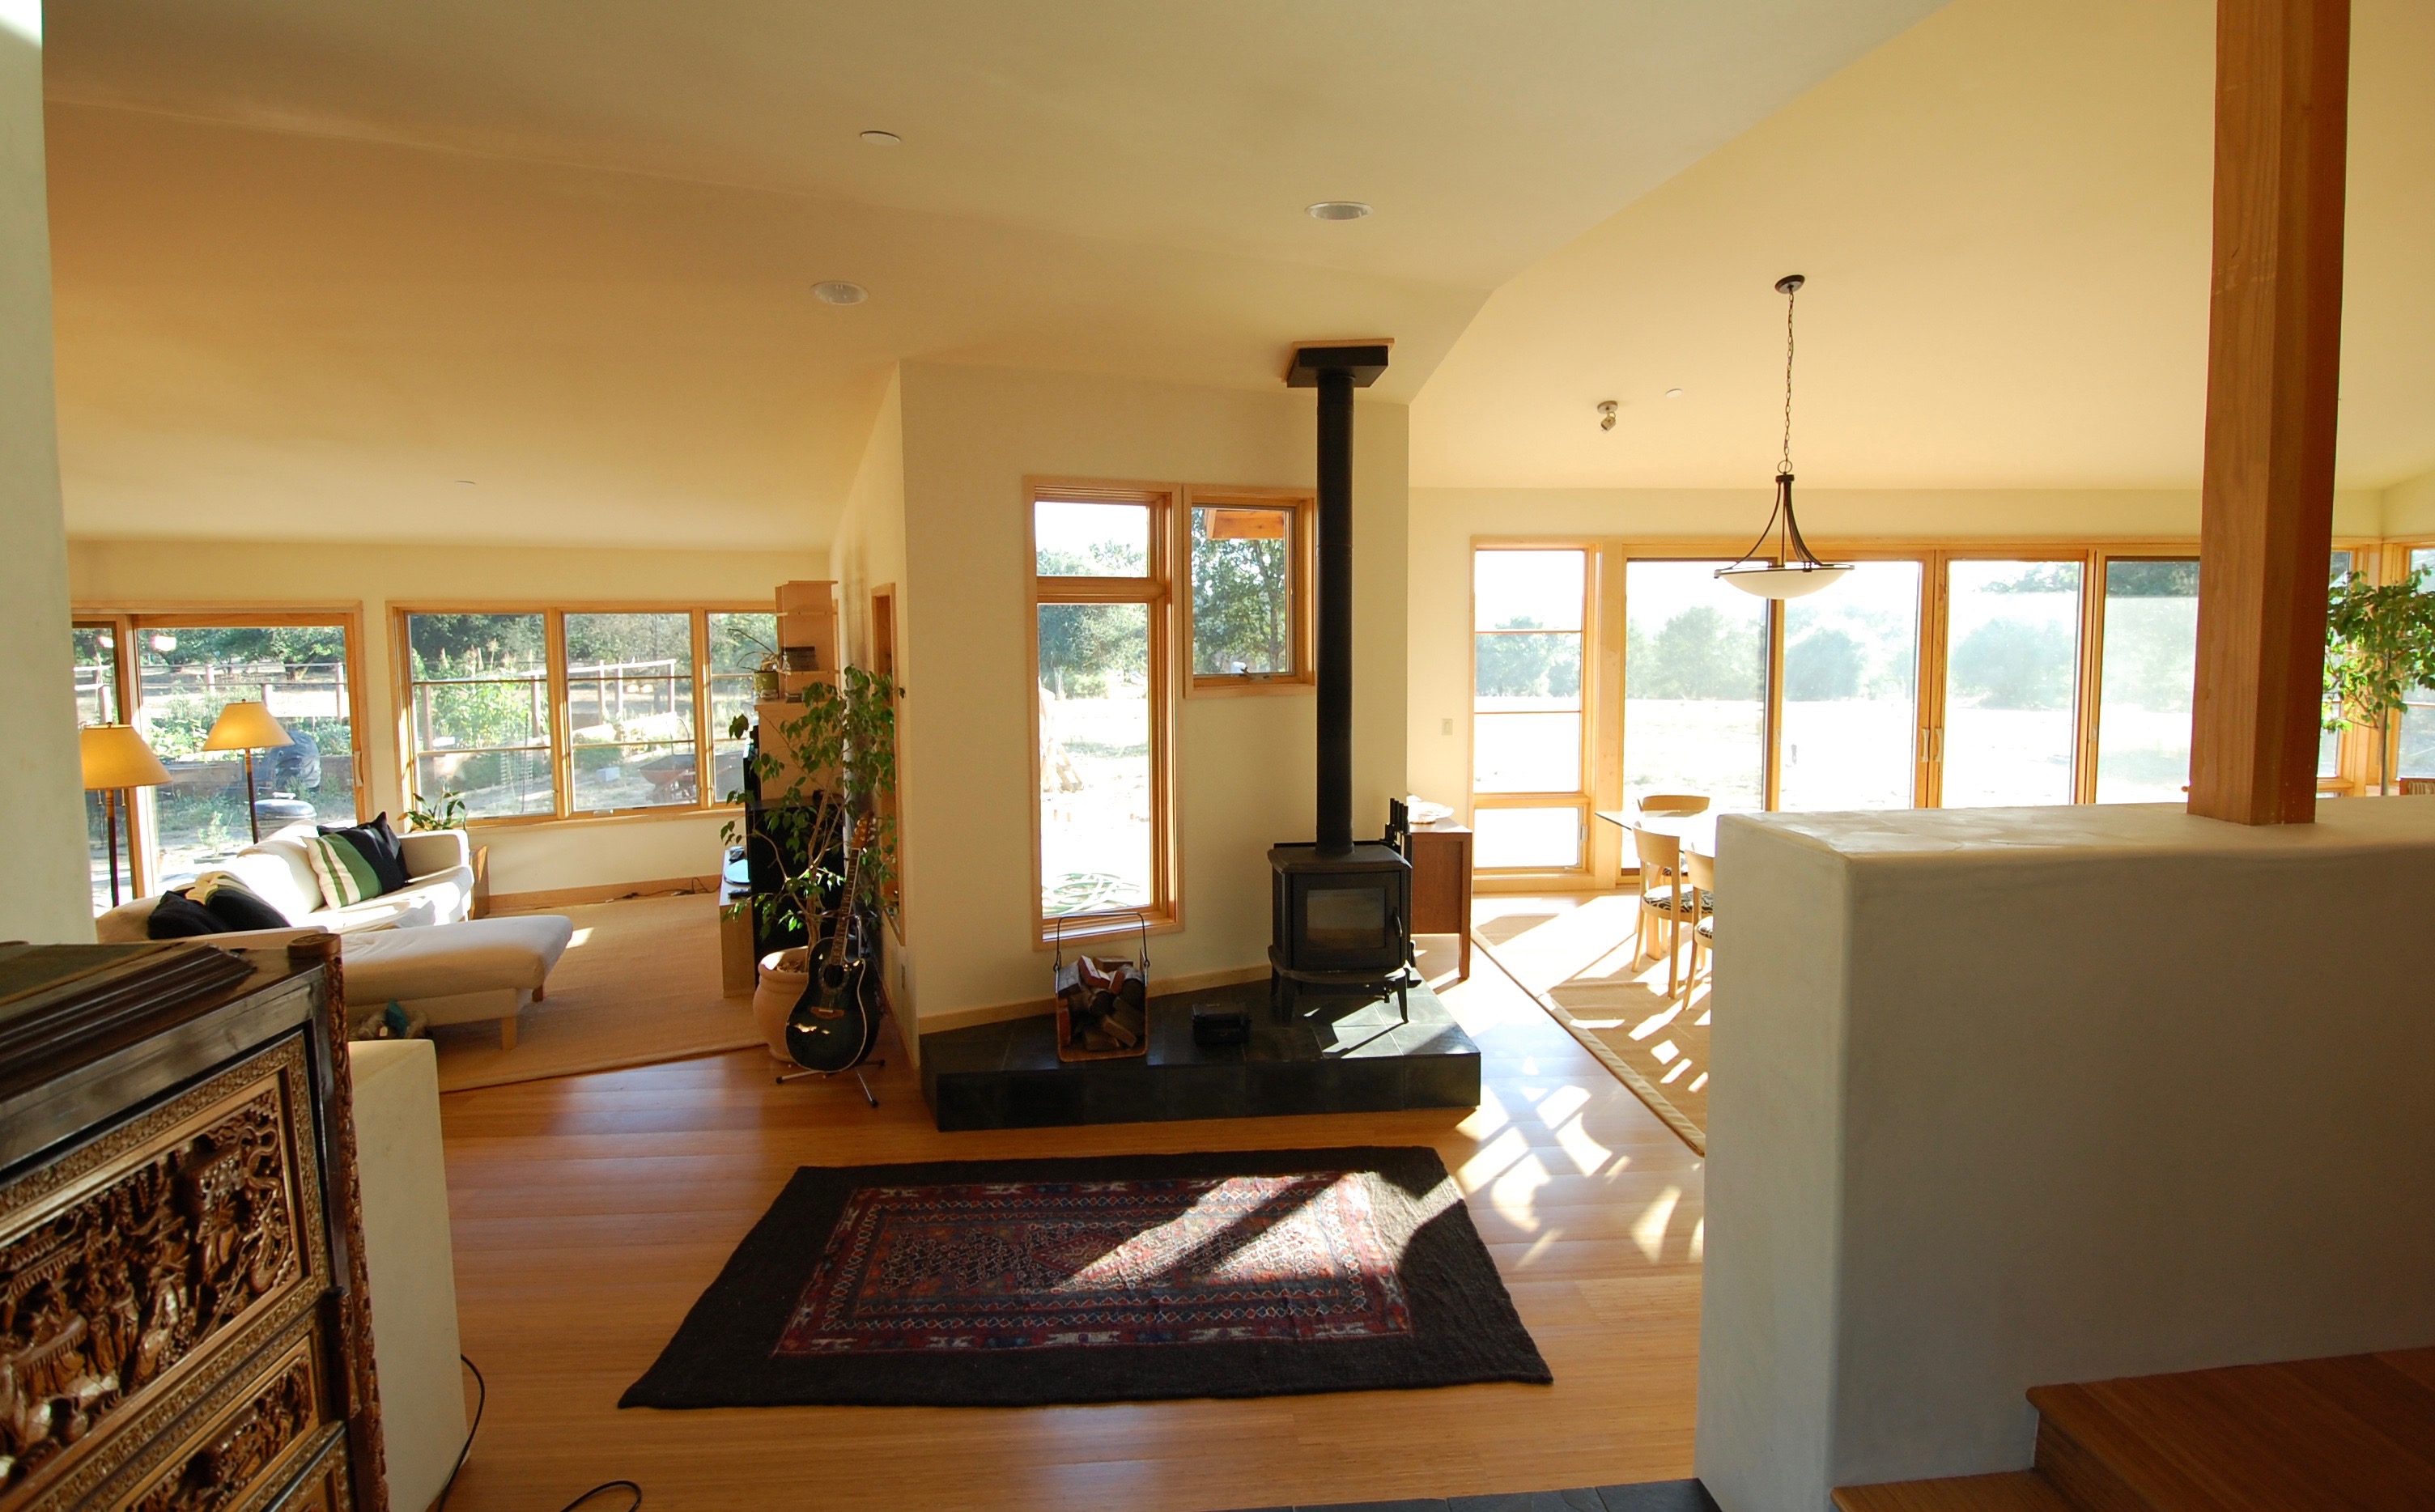 Light filled and comfortable home with passive solar heating and passive cooling